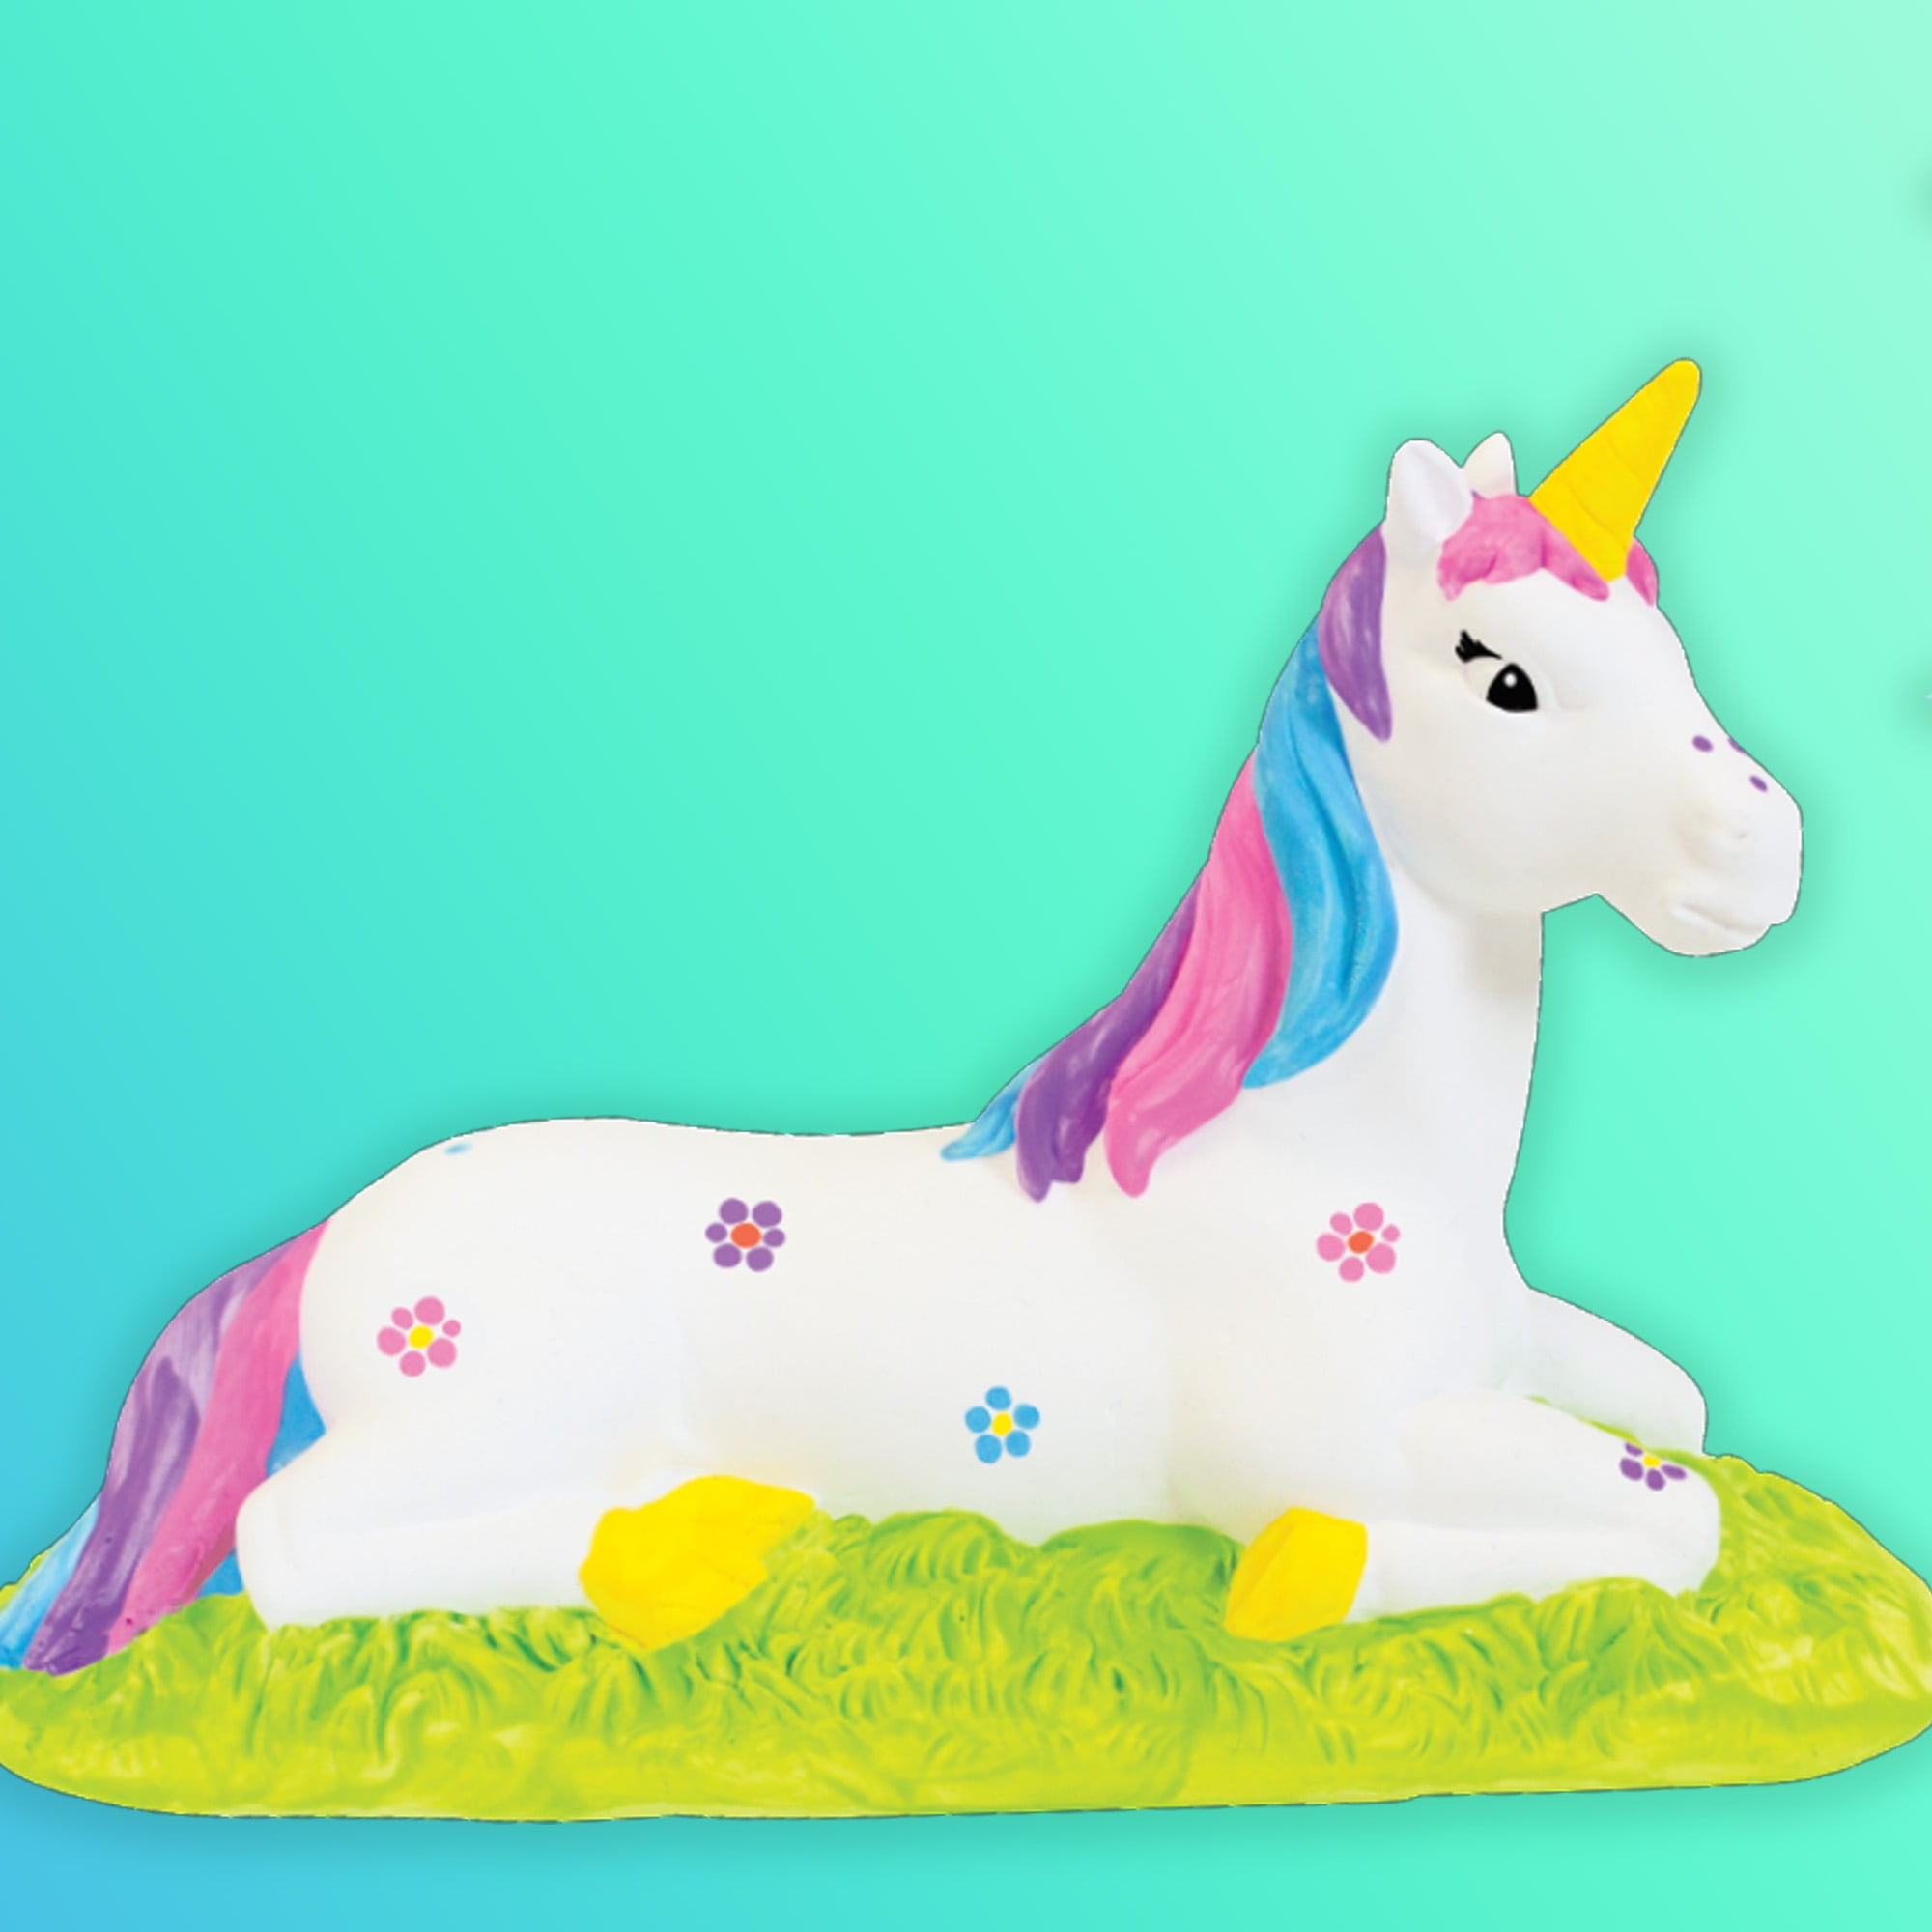 It's So Me! Paint Your Own Unicorns – DIY Ceramic Unicorn Kit – Arts and  Crafts Kits- Great Birthday Party Activities for Kids Ages 6, 7, 8, 9